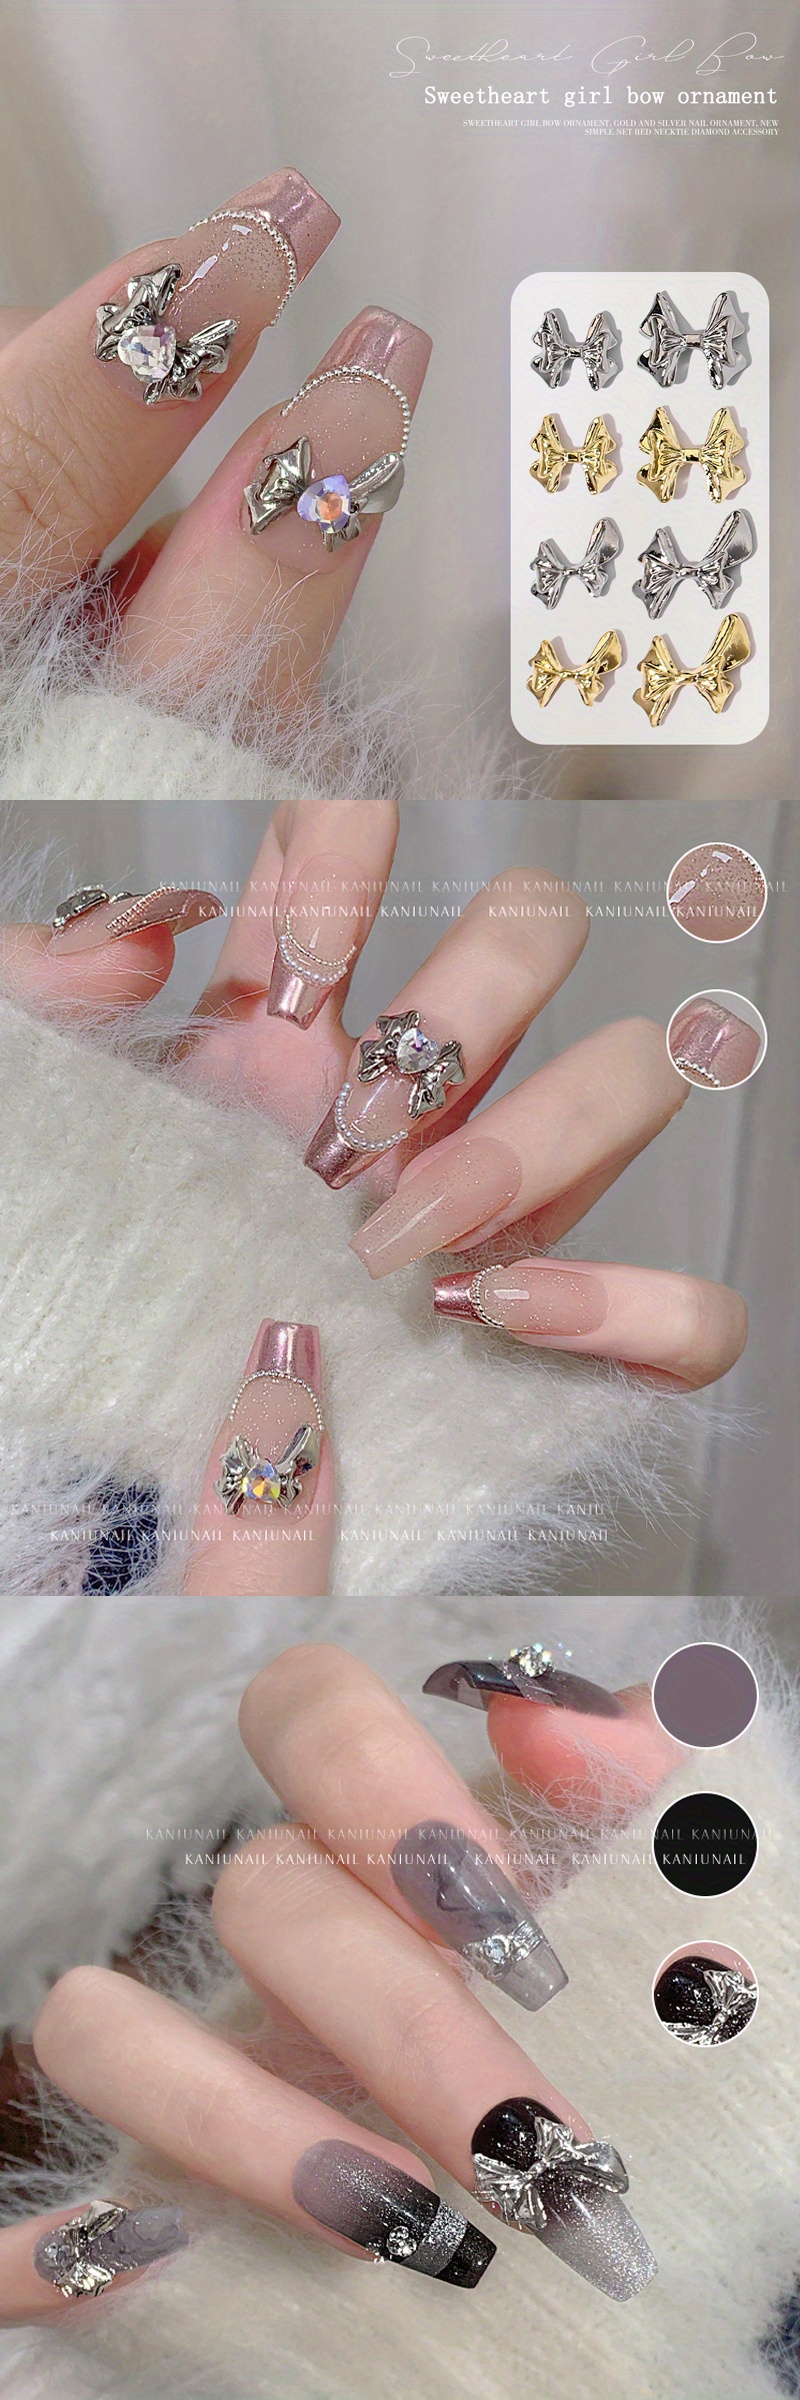 Bow Nail Art Is The Perfect Combination Of The Balletcore And Blokette  Aesthetics